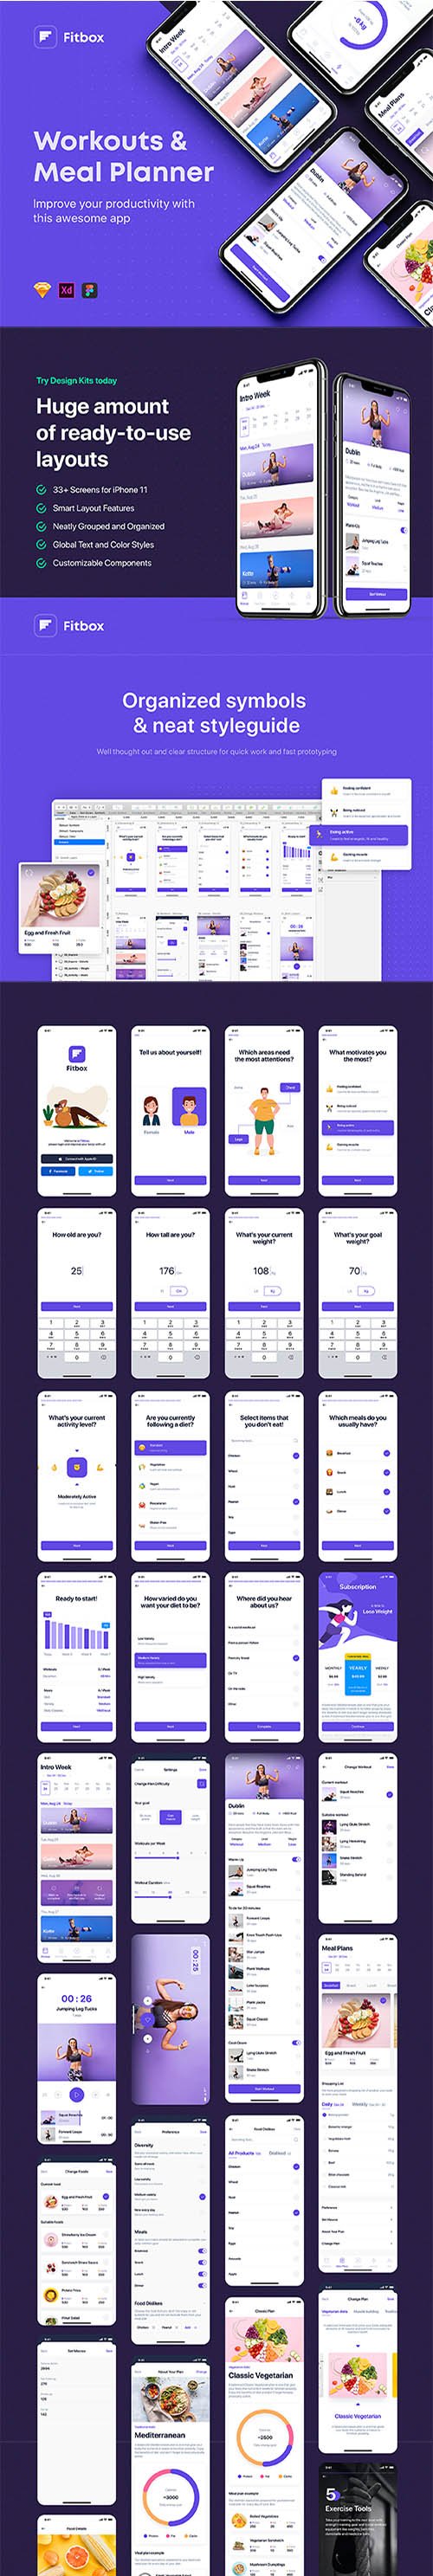 Fitbox - Workouts & Meal Planner UI Kit